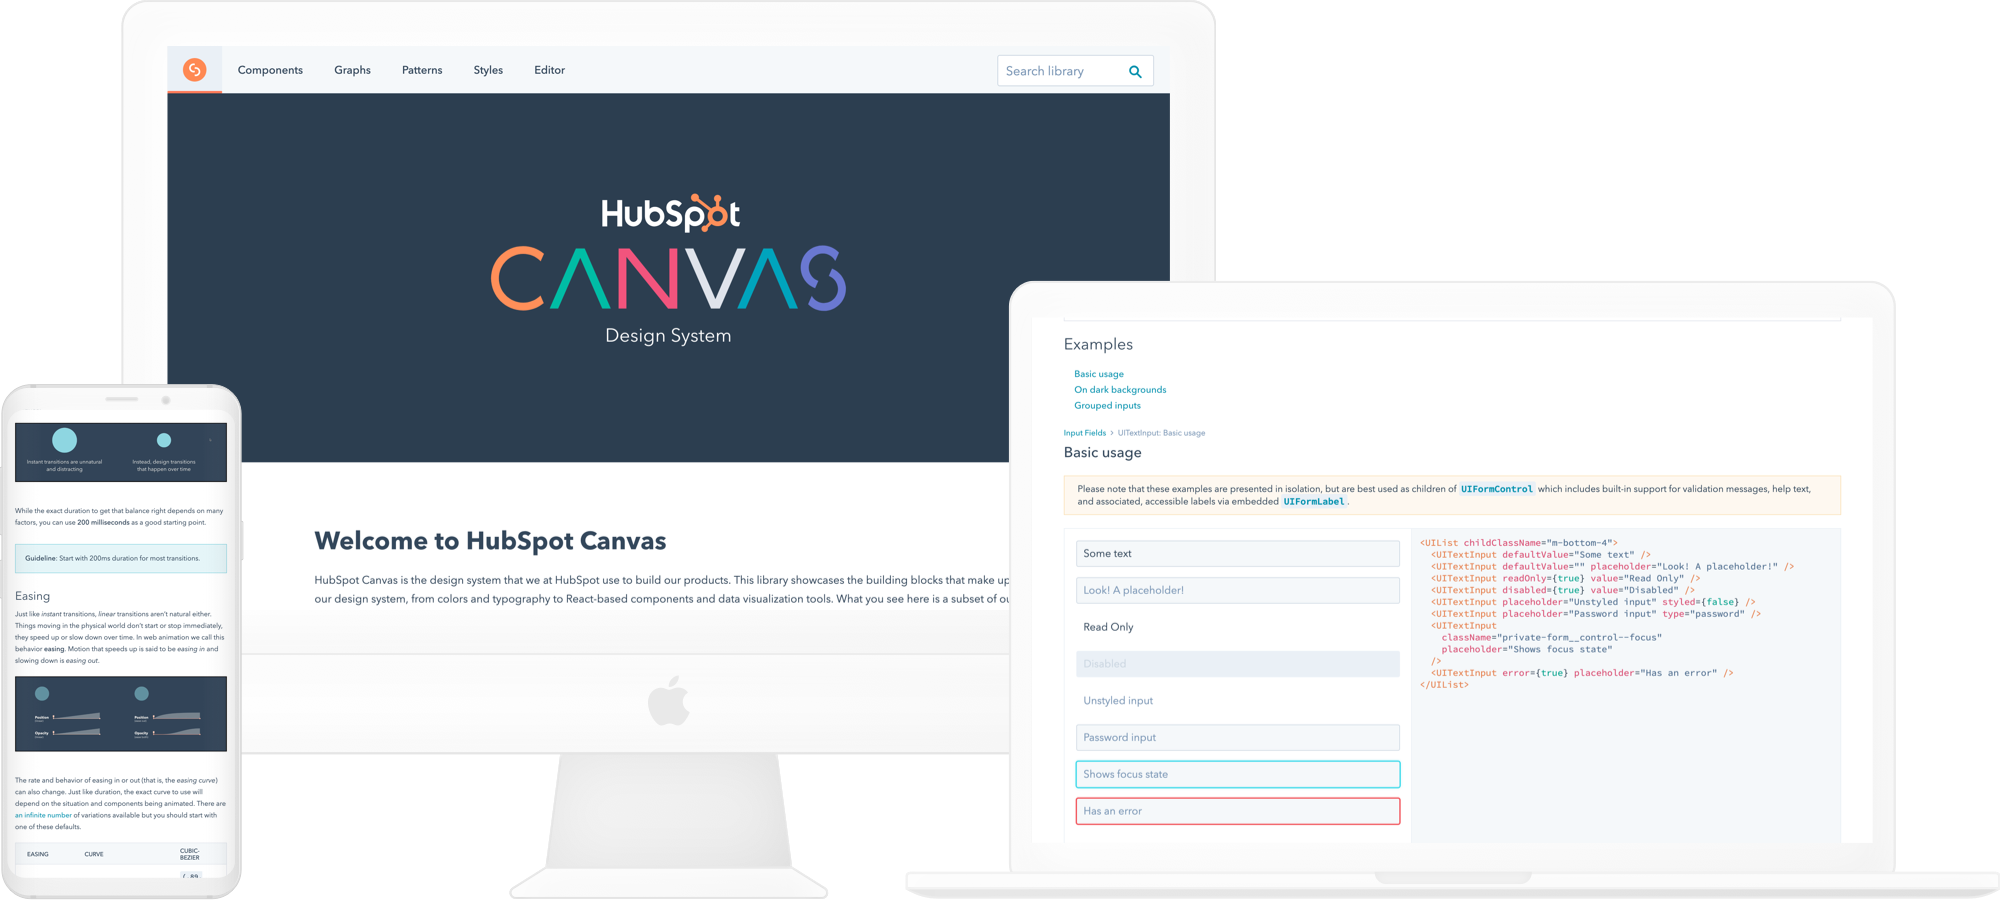 Mobile, wide-screen desktop, and laptop views of different pages of the Canvas Design System's public website.